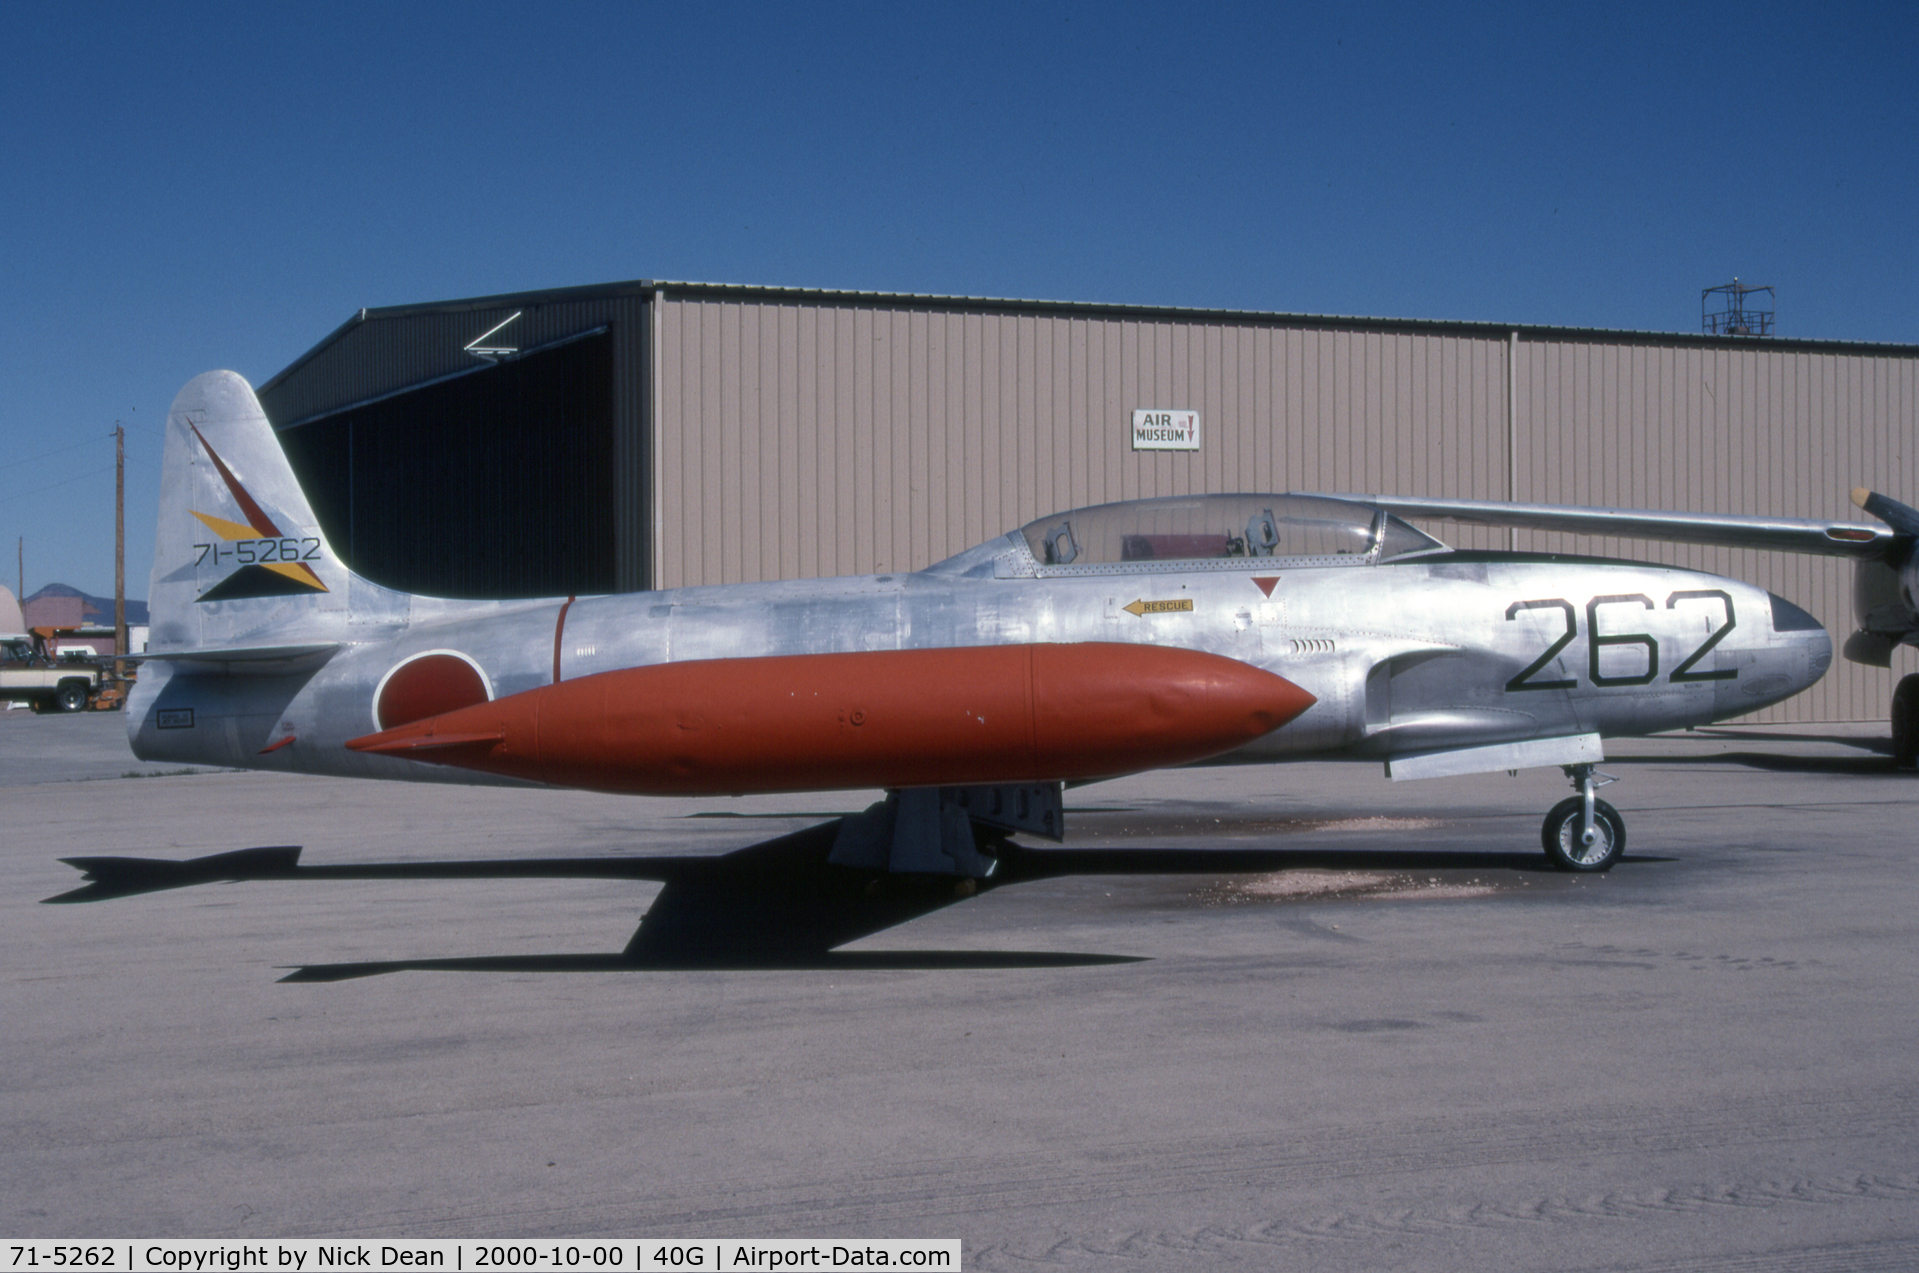 71-5262, 1953 Lockheed T-33A Shooting Star C/N KAC1062, 40G (Painted as 71-5262 but is actually 53-5341)